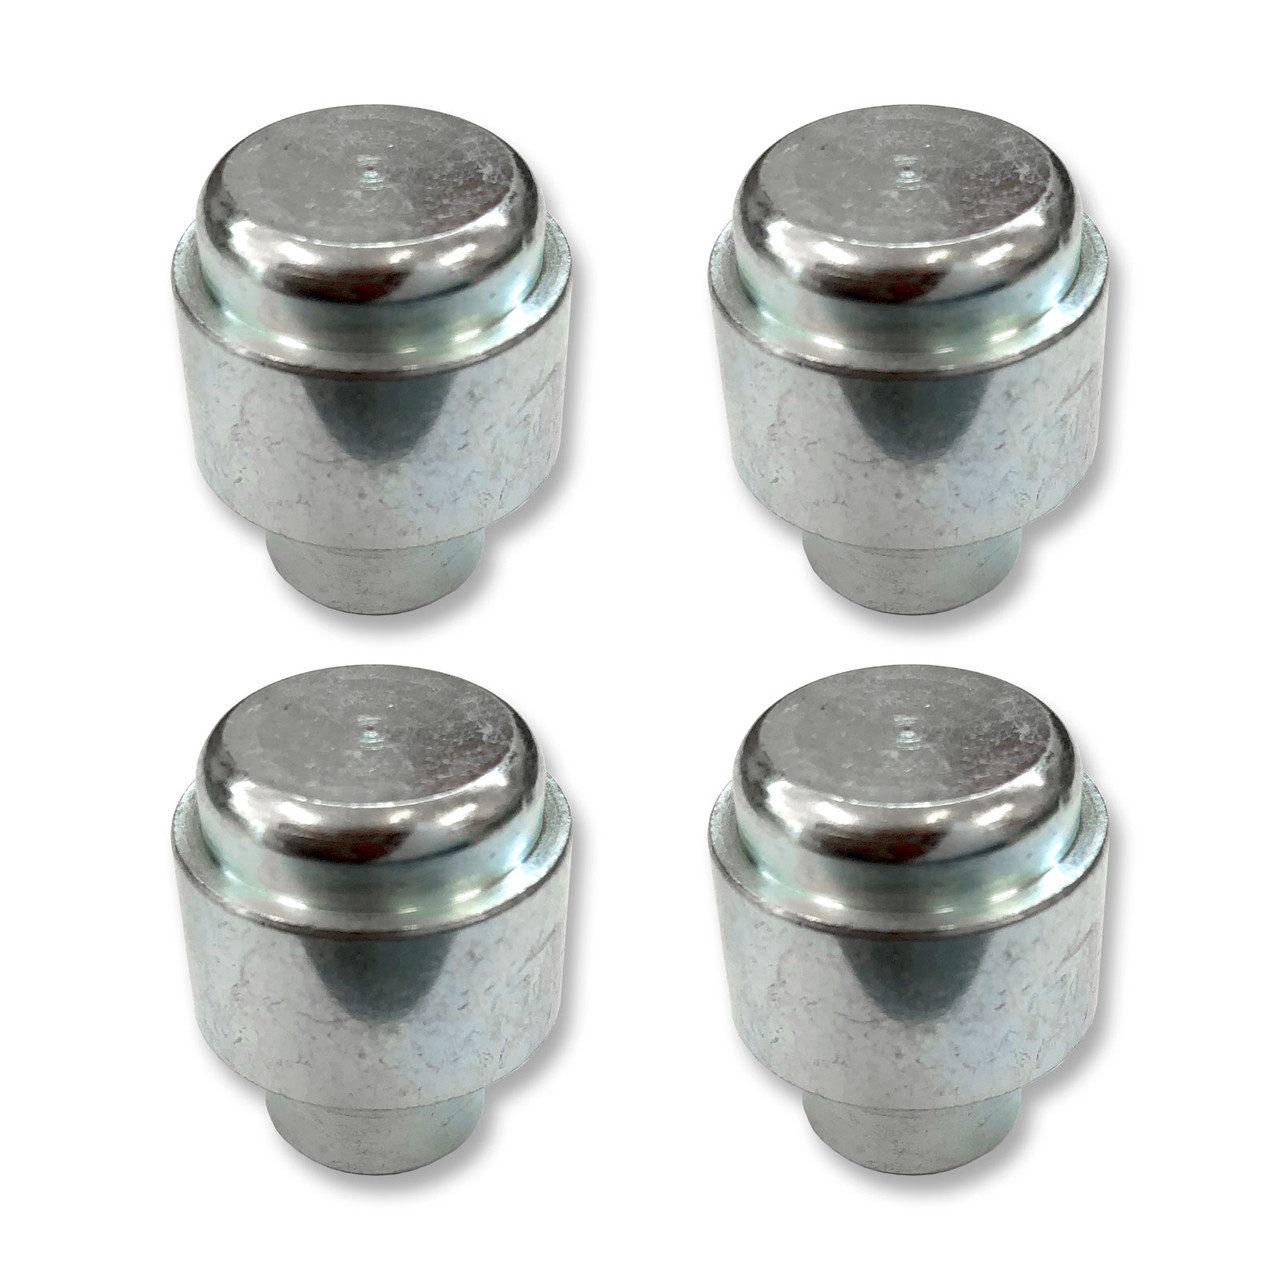 82250 - Coats Tire Changers Replacement Spring Pin Buttons for Adjustable Jaws - 4 Pack